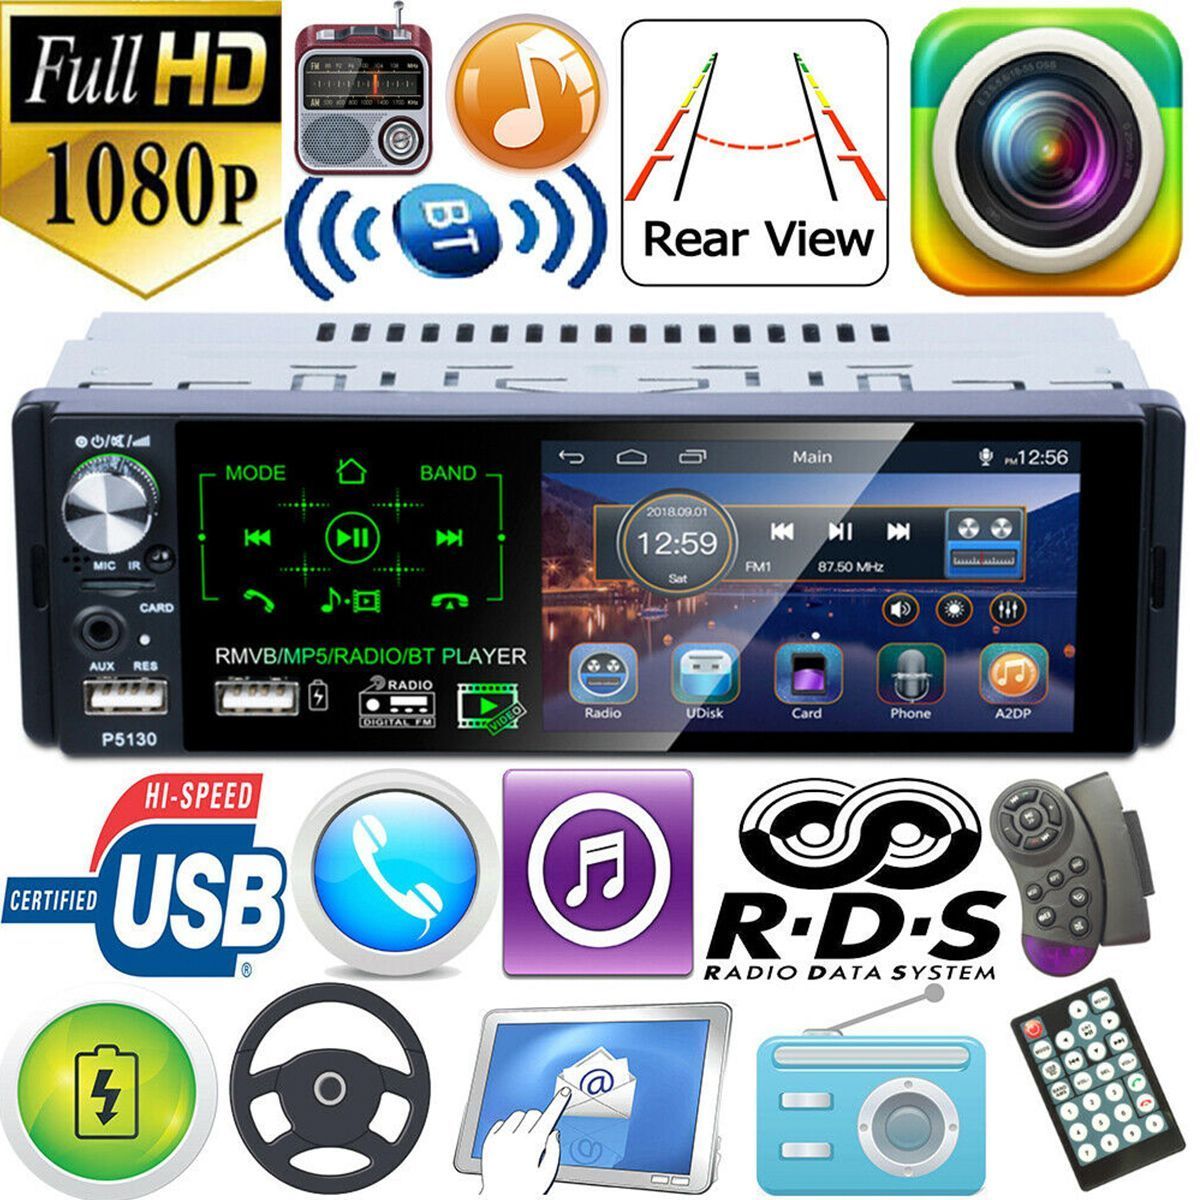 P5130-41Inch-1DIN-Car-Stereo-Radio-MP5-Player-Full-Touch-Screen-FM-AM-RDS-bluetooth-USB-Strong-Bass--1649564